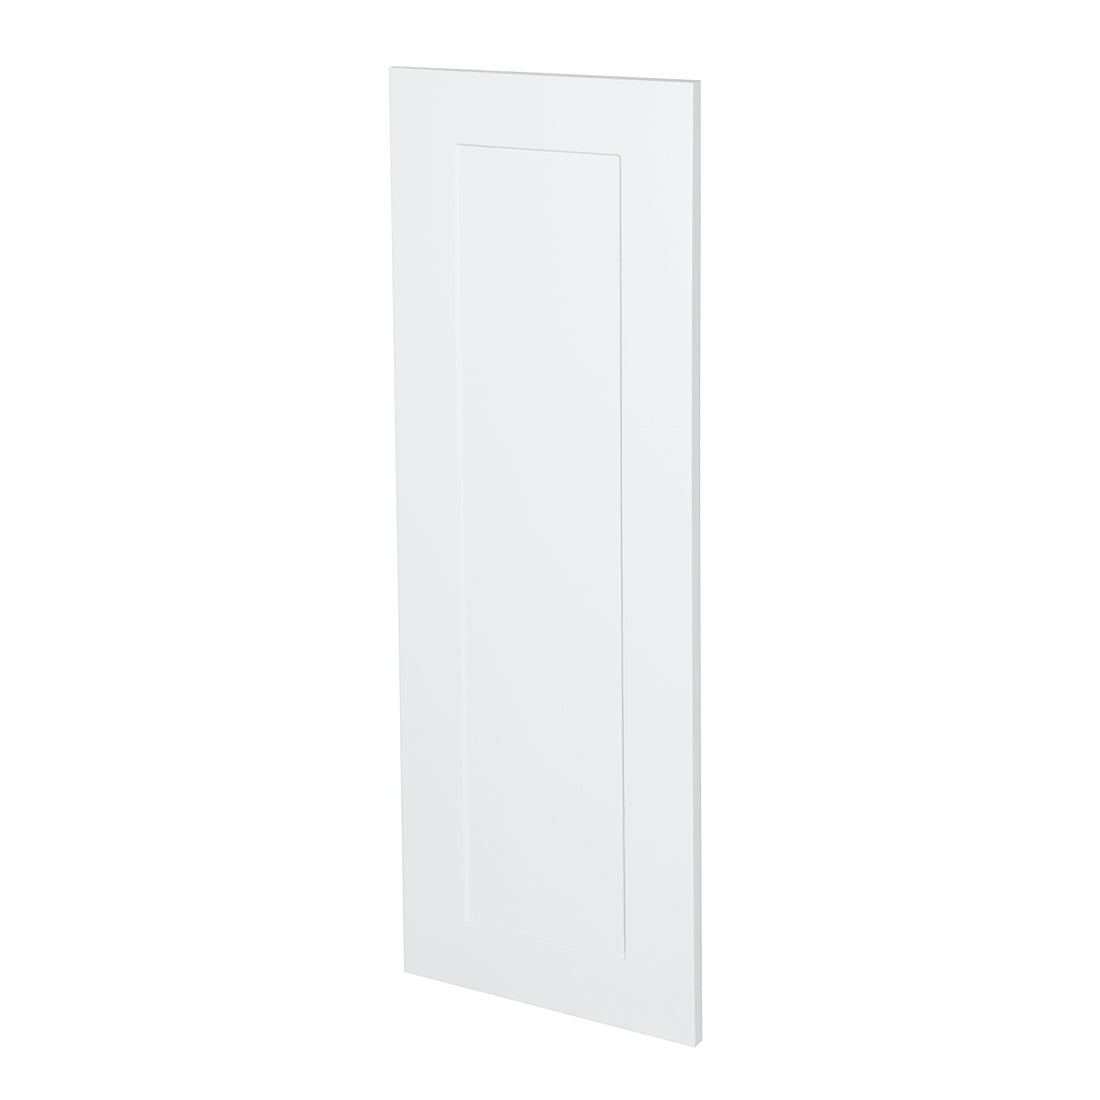 White Shaker Style Kitchen Cabinet End Panel (12 in W x 0.75 in D x 30 in H) -  Pro-Edge HD